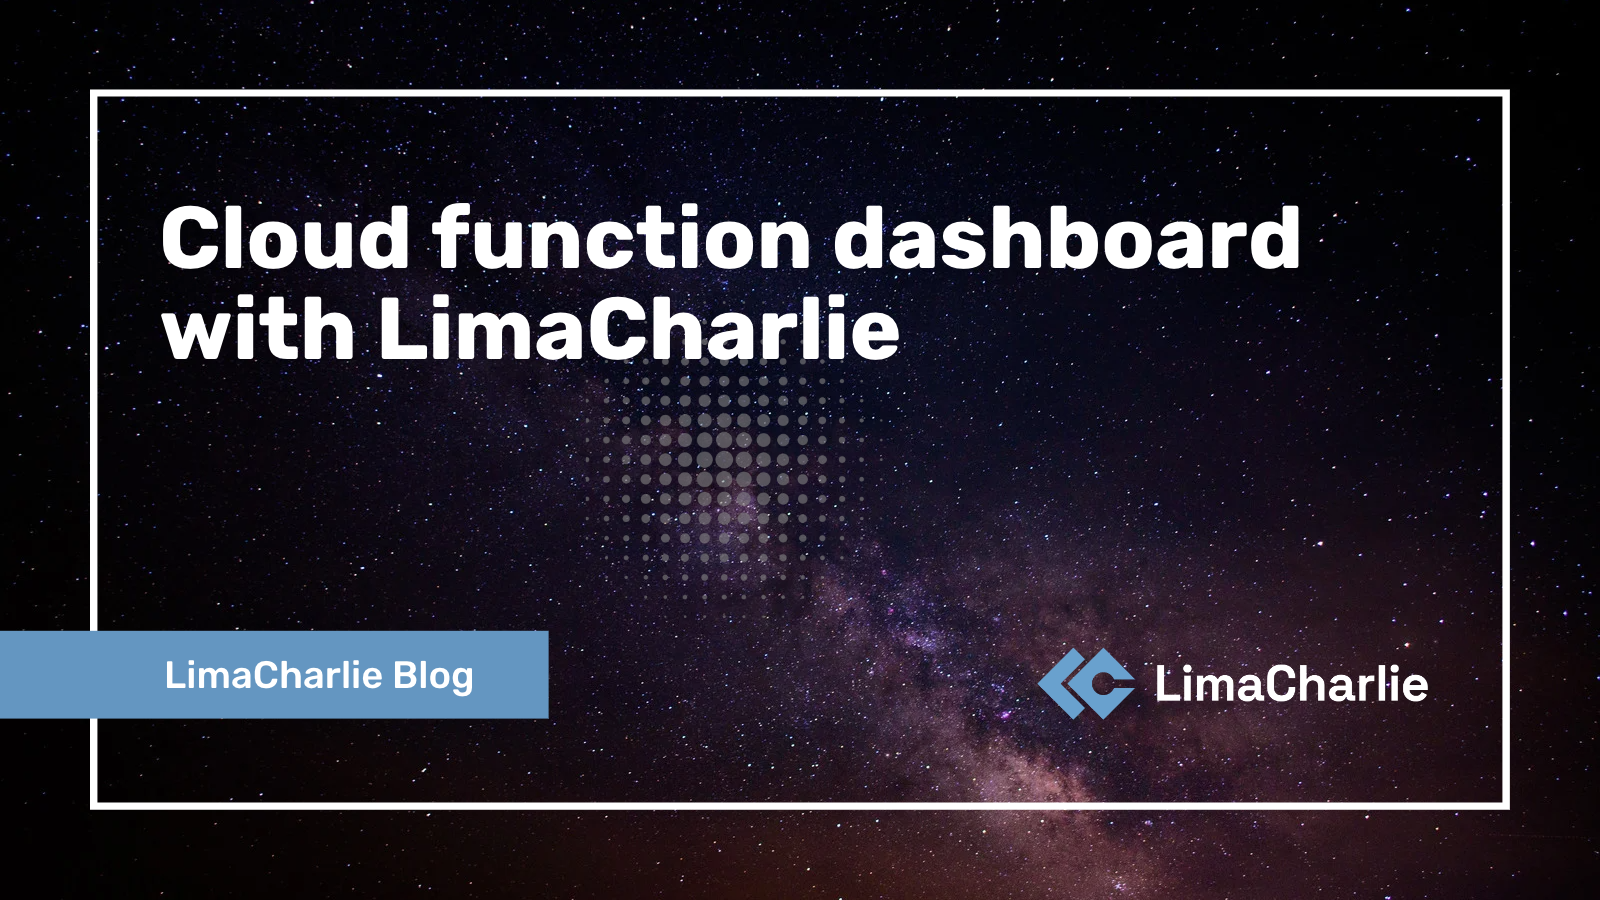 Cloud Function Dashboard with LimaCharlie